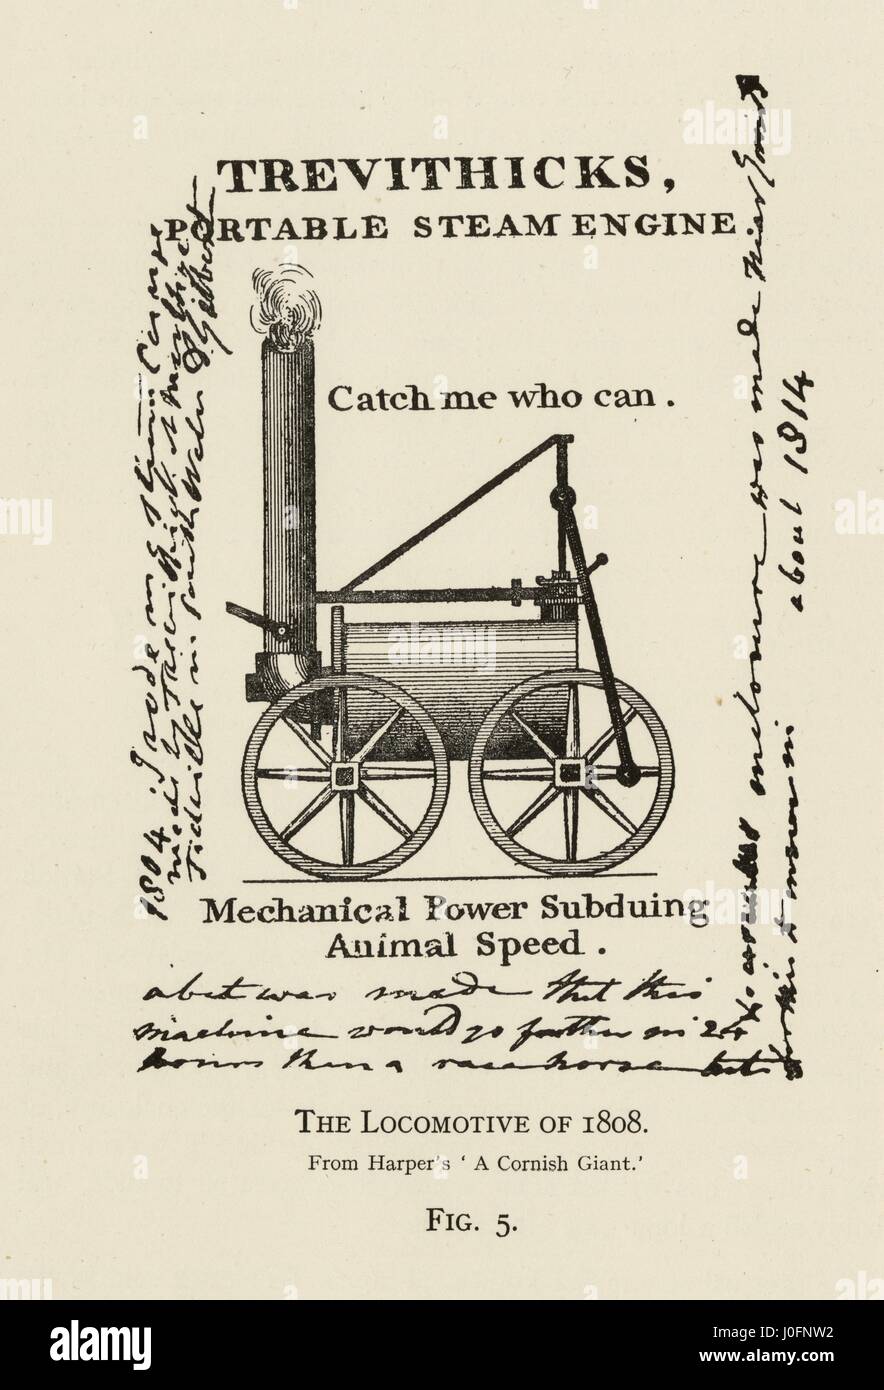 Richard Trevithick's portable steam engine of 1808, 'Catch me who can', signed ticket. Steam locomotive, demonstrated to the public at a 'steam circus' organized by Trevithick on a circular track in Bloomsbury, just south of the present-day Euston Square Stock Photo